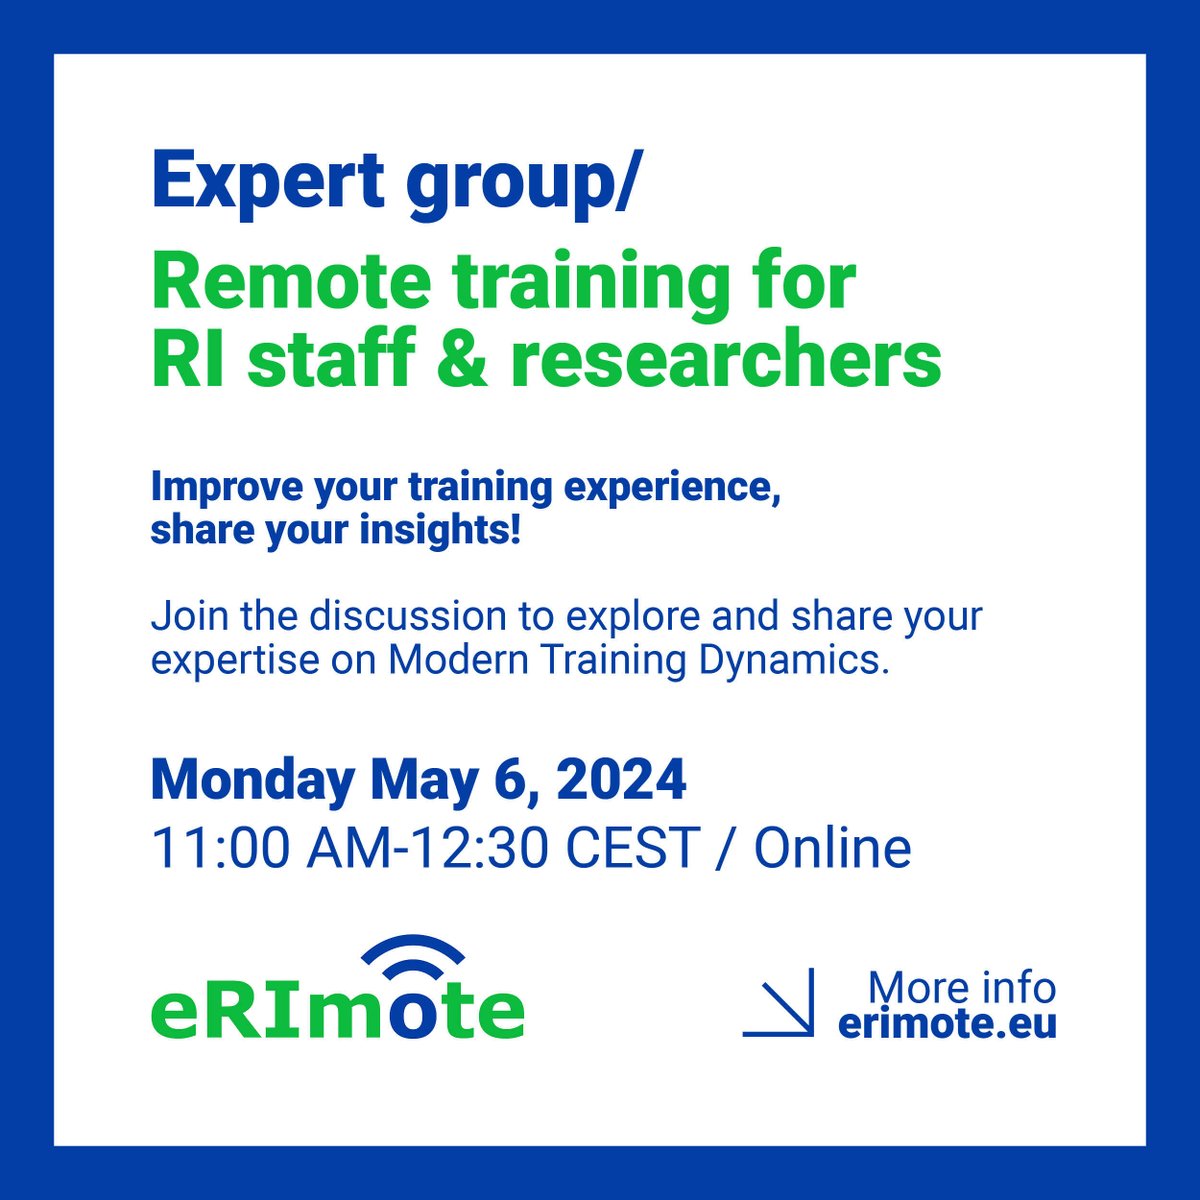 Unlocking the Future of #Training: Join the eRImote Expert Group meeting! eRImote EG focuses on #training for #remote #access provision invites you to an enlightening discussion on the evolving landscape of training #methodologies and resources. Register👇🏻 bit.ly/eRImote_EG3